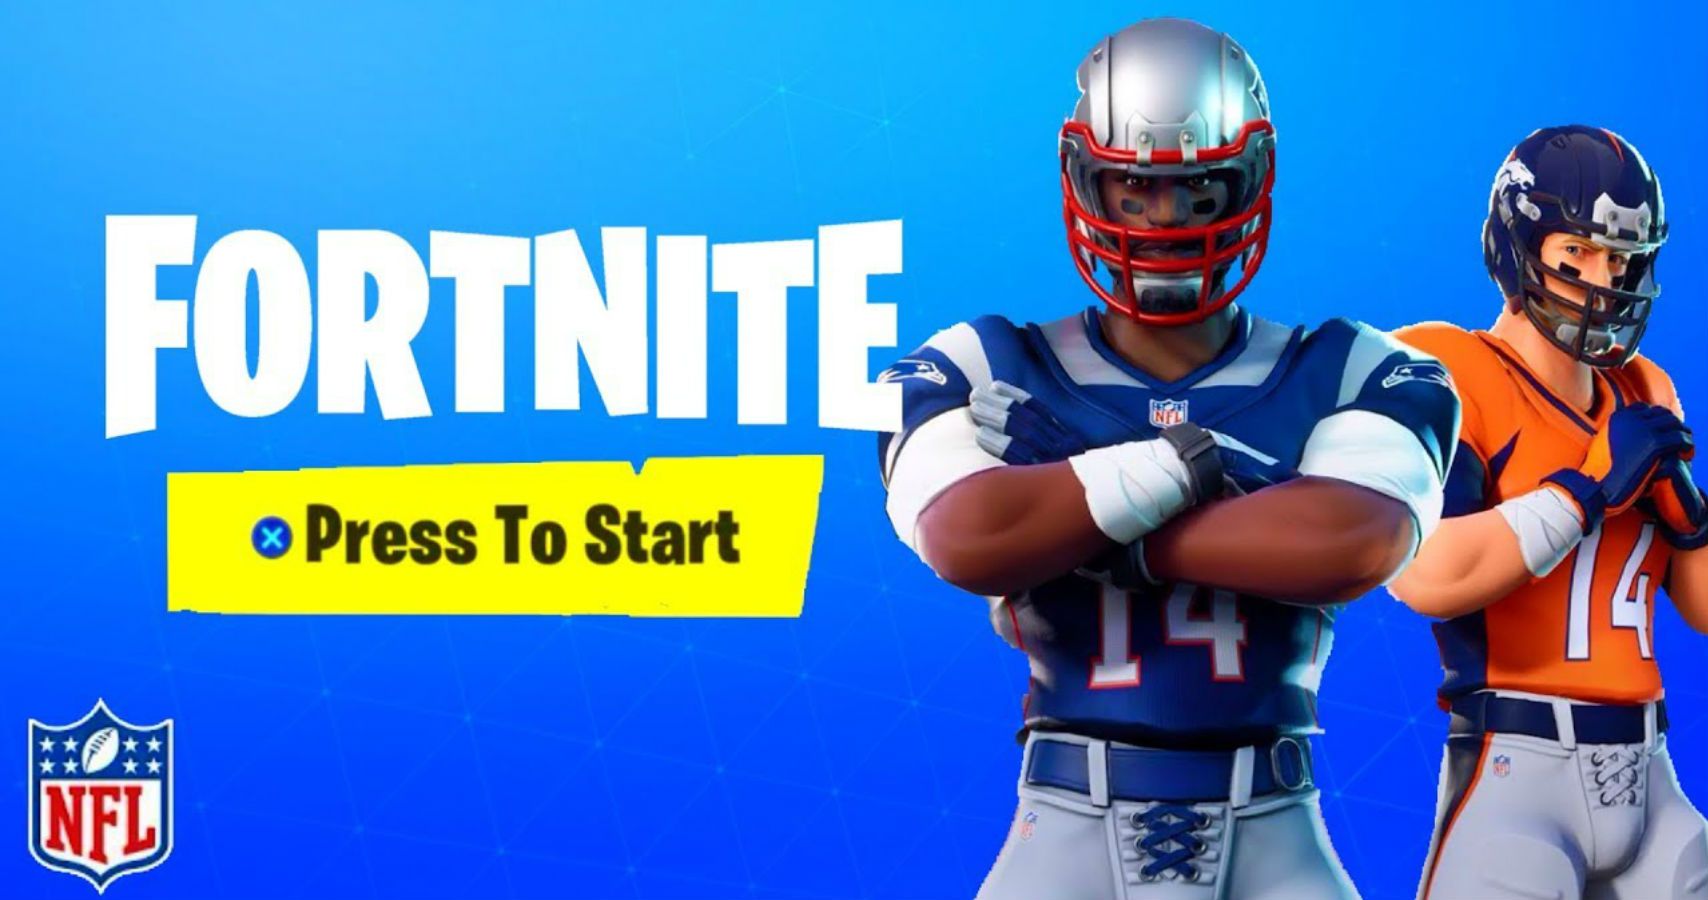  - fortnite and nfl deal